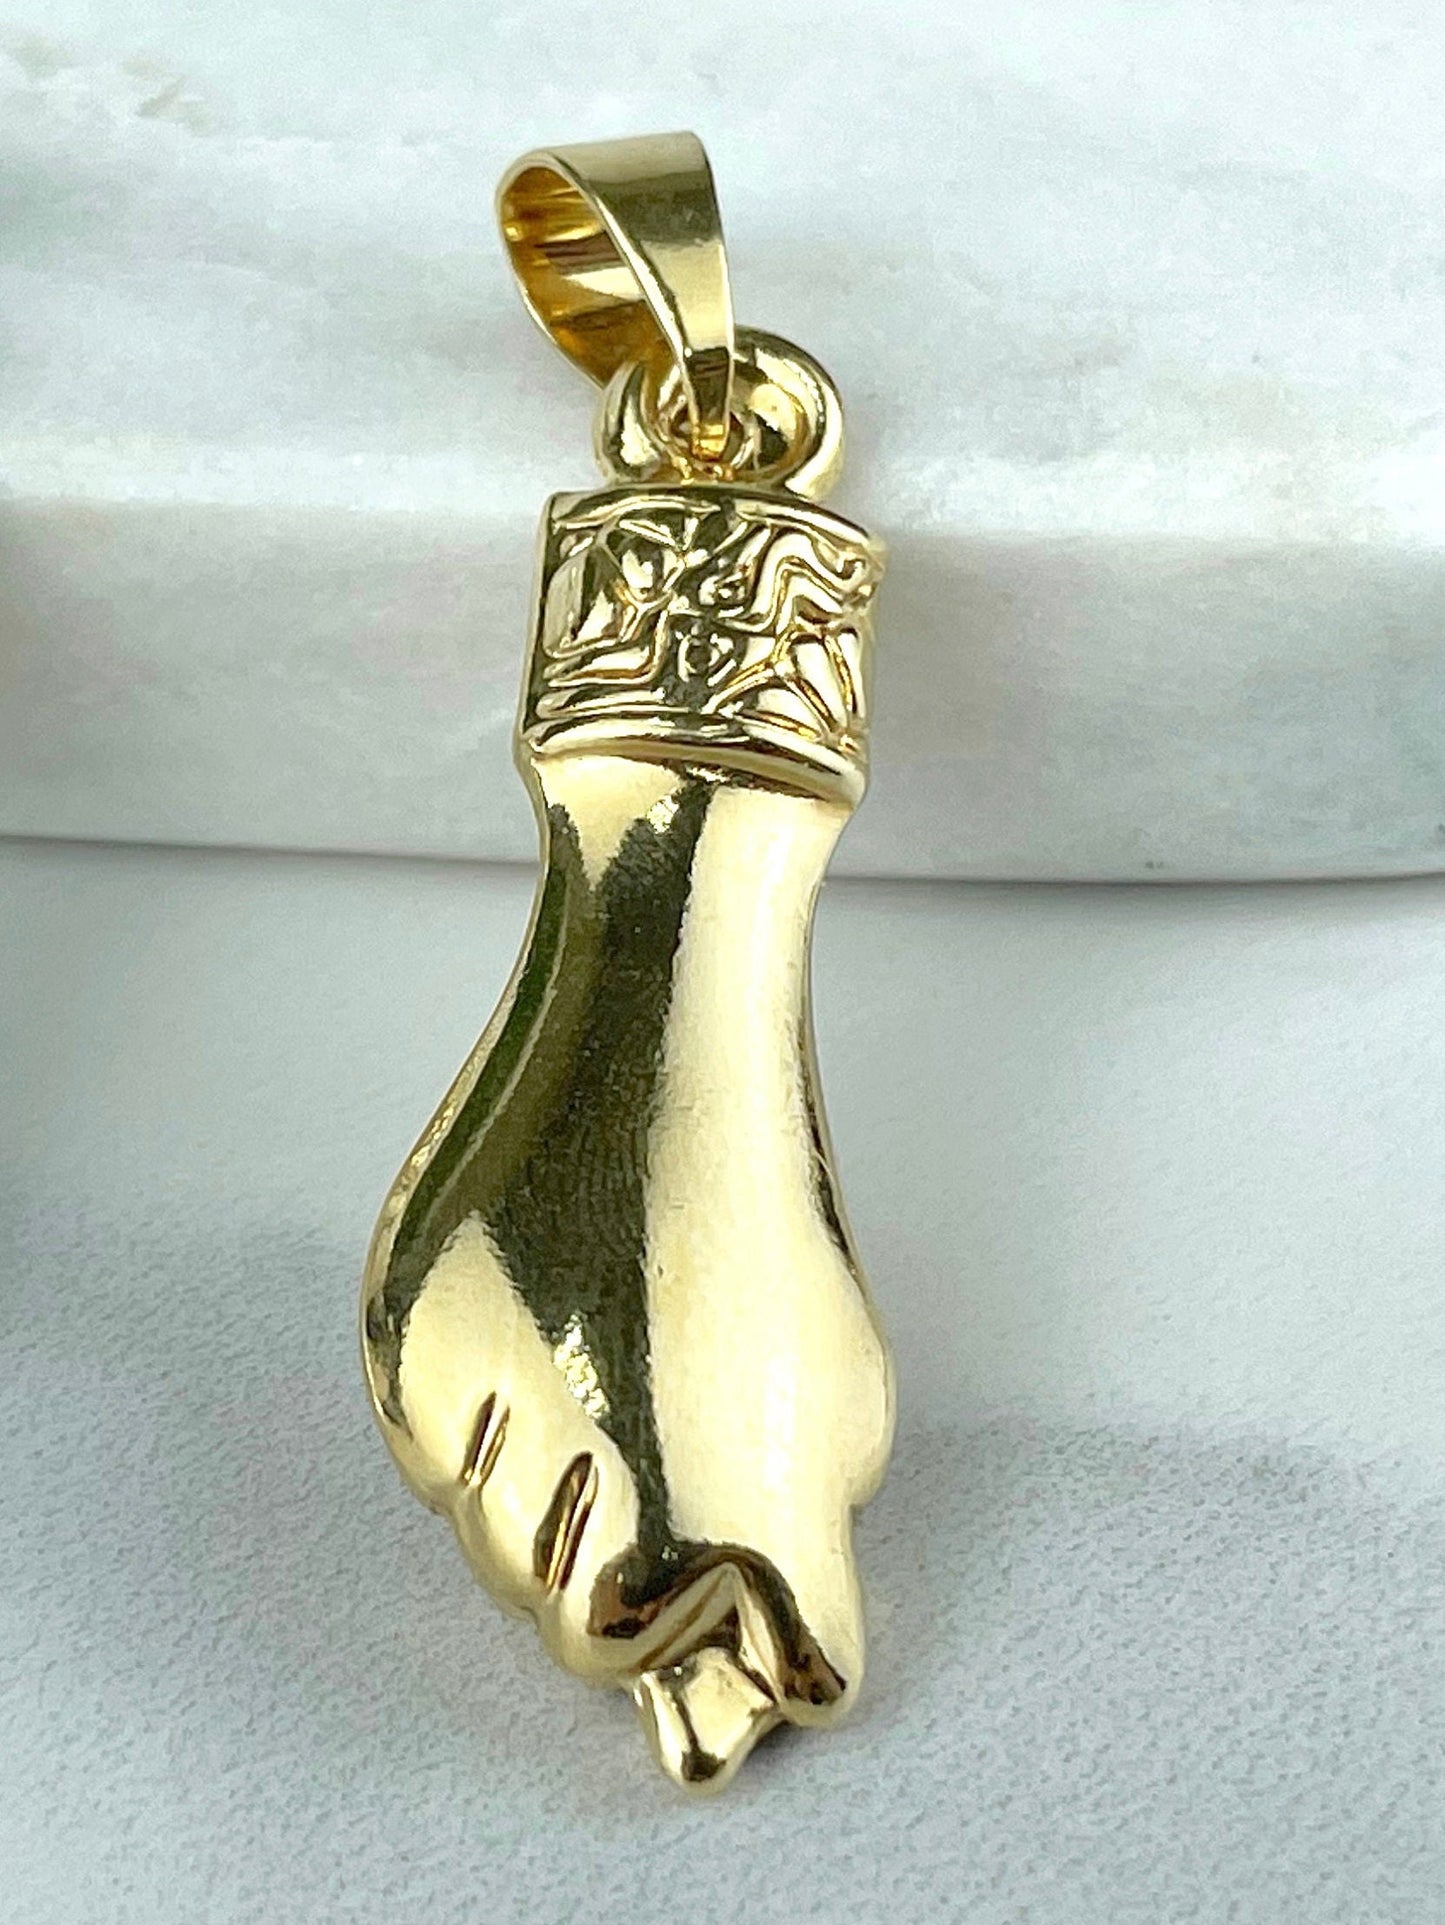 18k Gold Filled "Figa" Hand Pendant Charms, Gold, Silver or Two Tone, Wholesale Jewelry Making Supplies